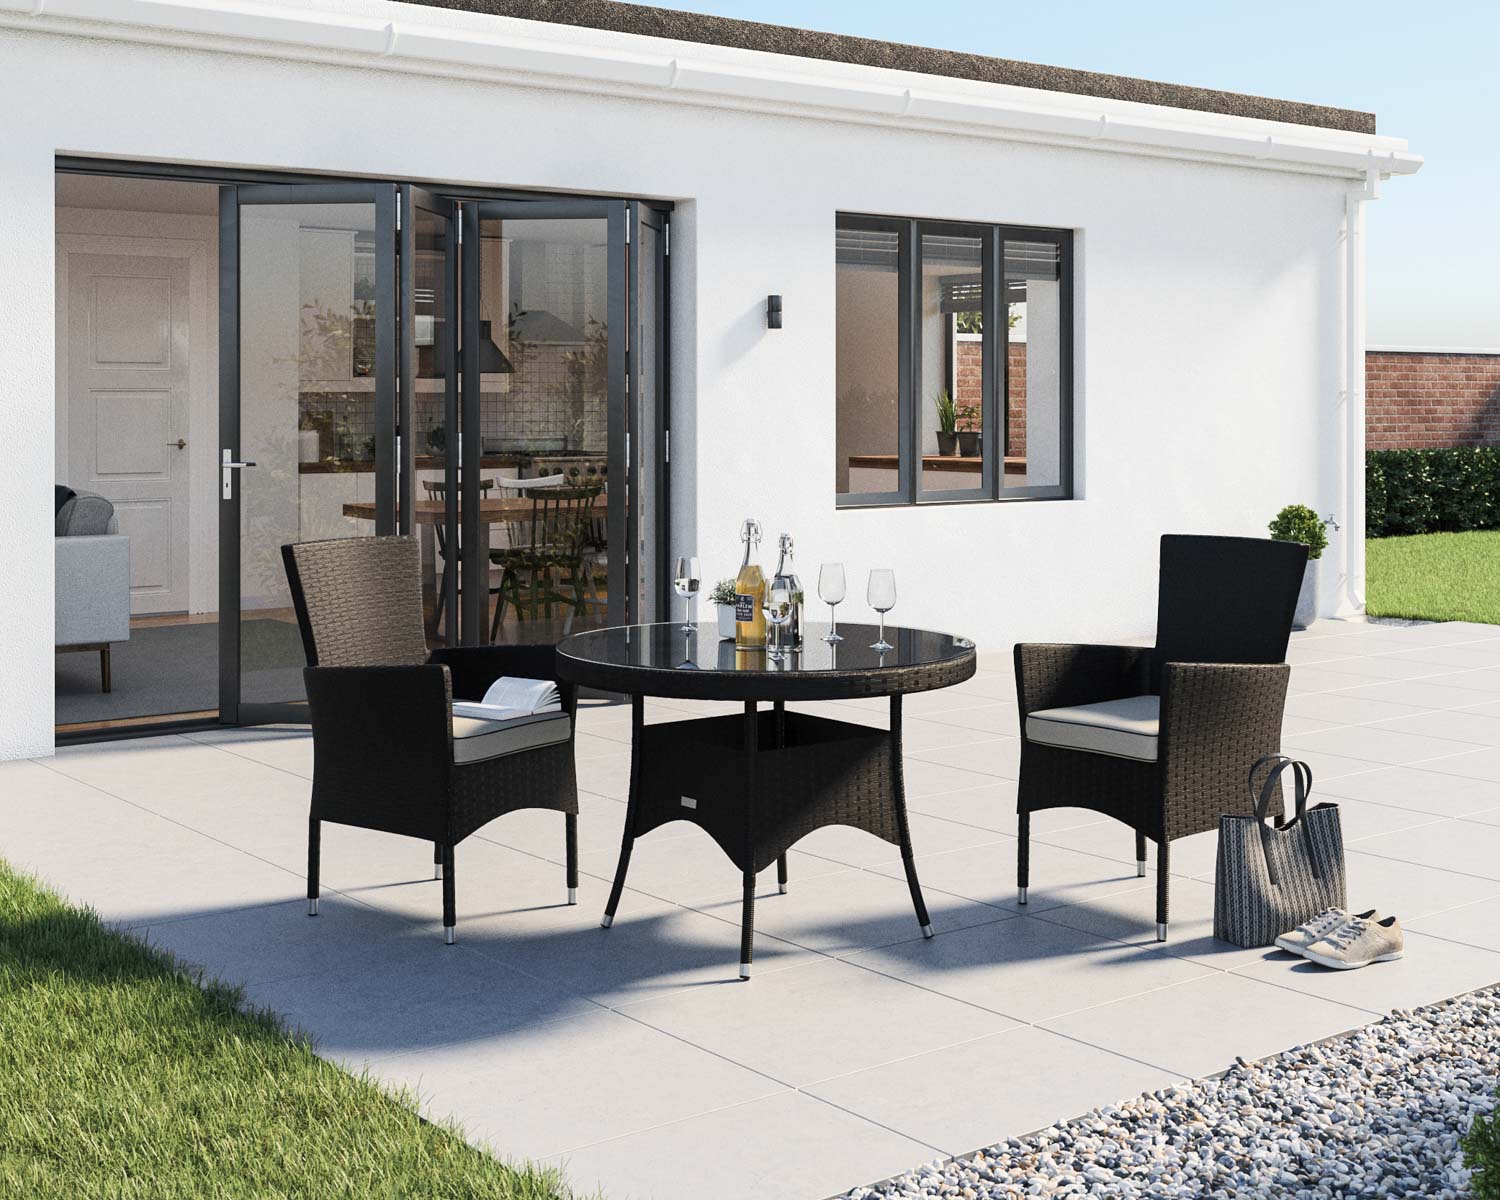 2 Seat Rattan Garden Dining Set With Small Round Table in Black & White